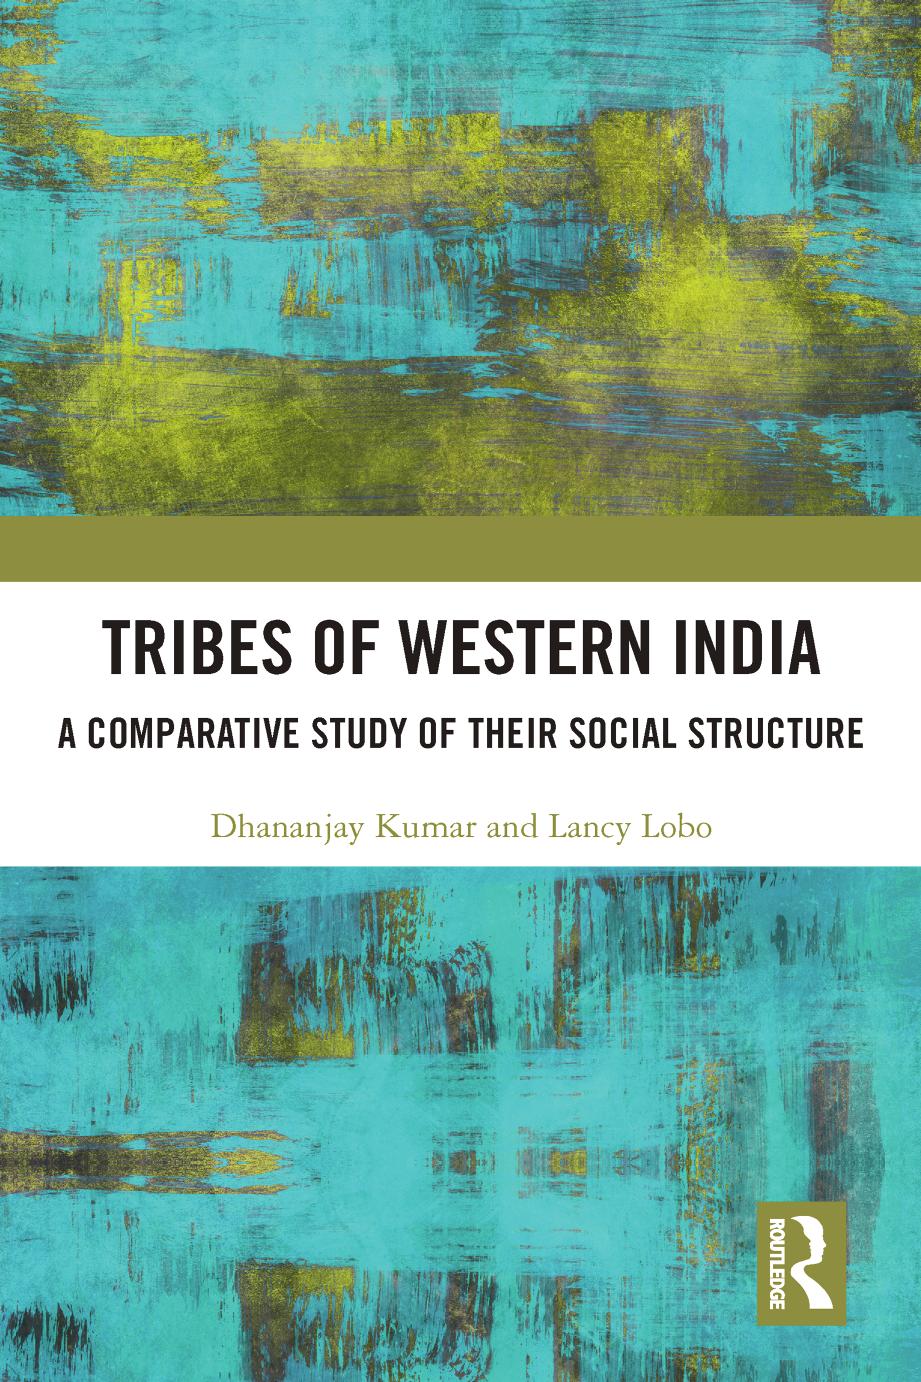 Tribes of Western India: A Comparative Study of Their Social Structure by Dhananjay Kumar Lancy Lobo